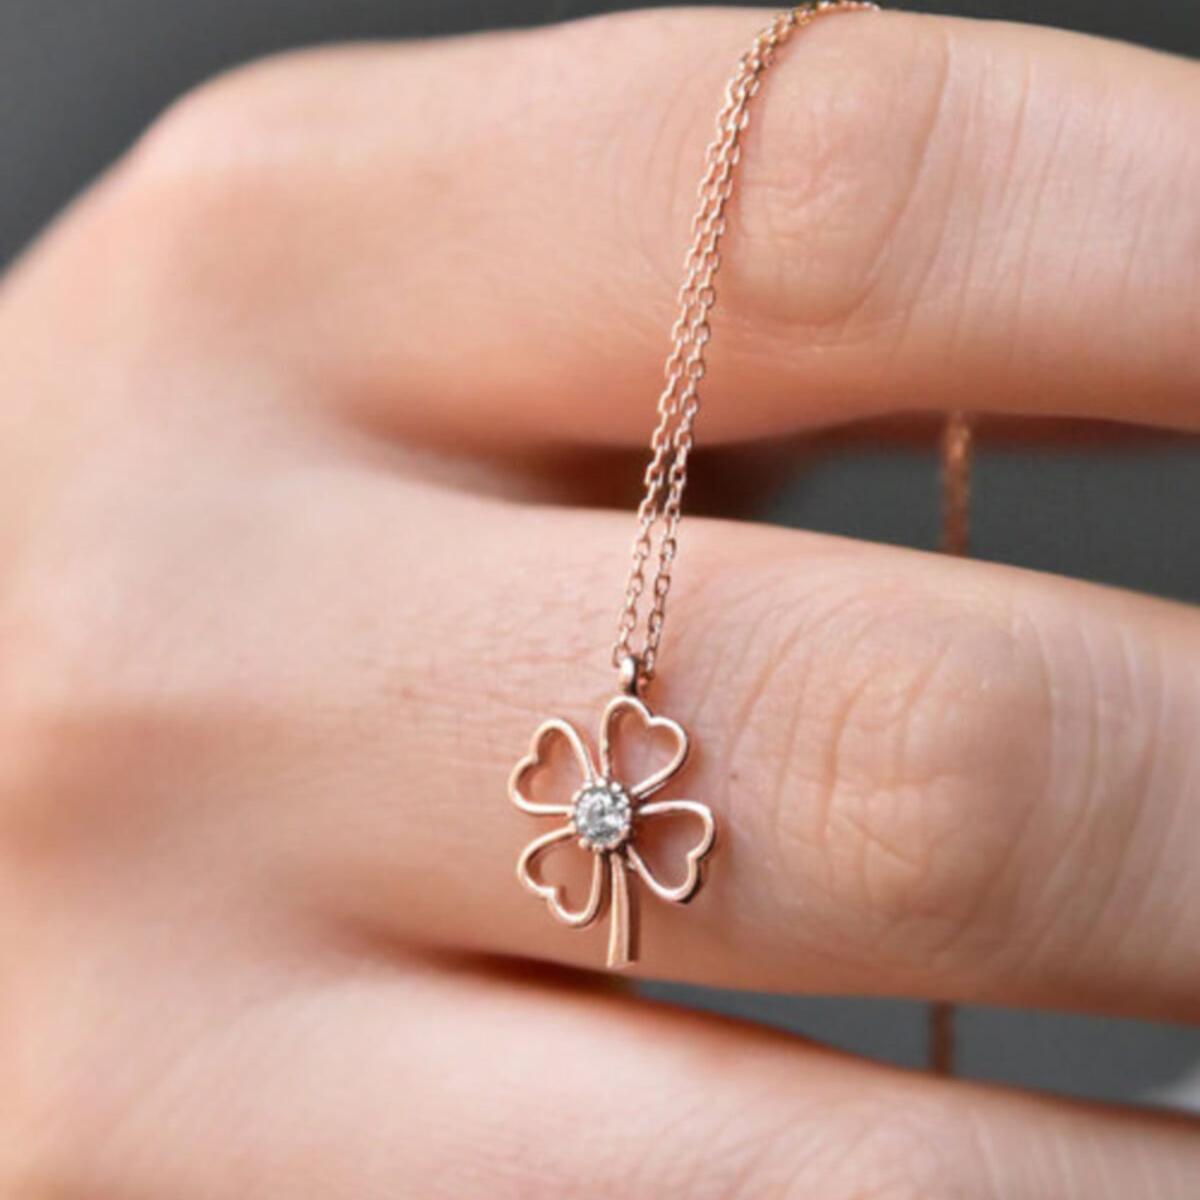 Clover Diamond Necklace • Four Leaf Clover Solitaire Necklace - Trending Silver Gifts